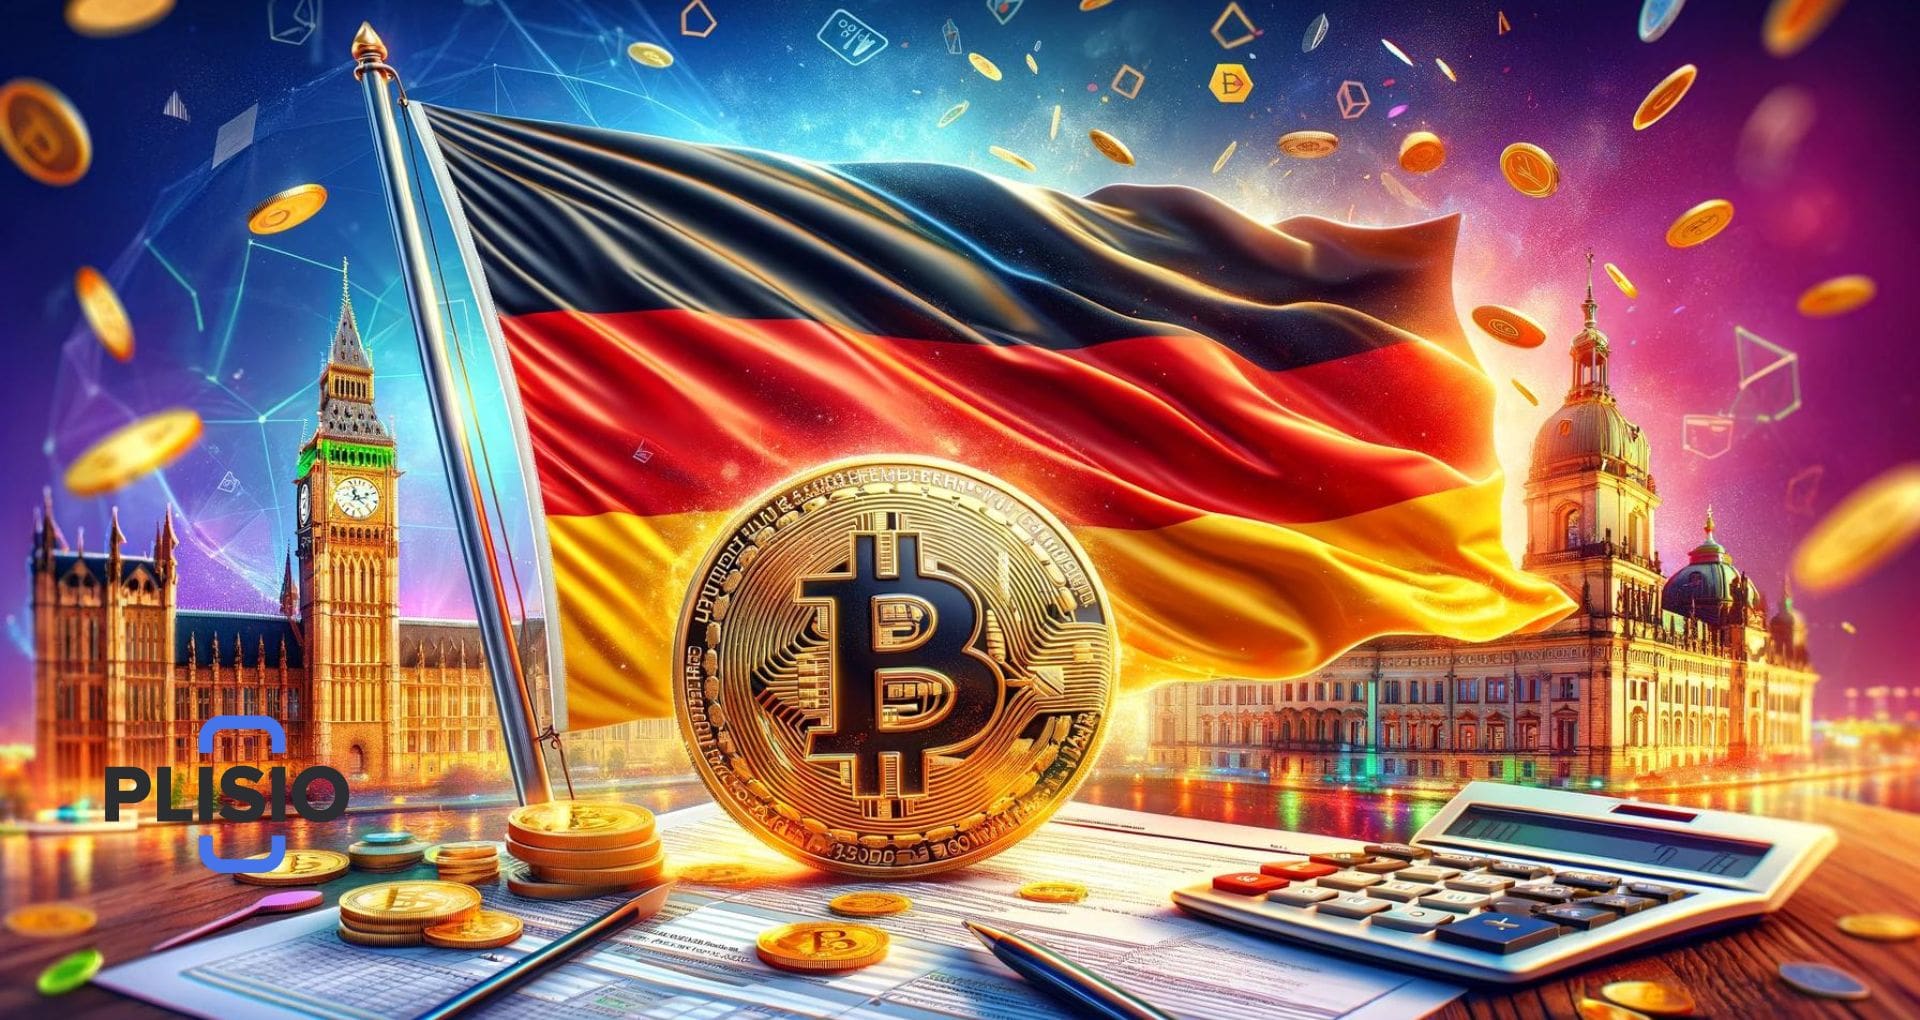 The crypto world is grappling with a million-dollar question – what is the German government doing with its massive Bitcoin holdings? According to data by Lookonchain, the recent transfer of 1,500 BTC, valued at roughly $95 million, has sparked a frenzy of speculation, with seasoned investors both worried and intrigued. Related Reading: Ethereum Co-Founder Blasts